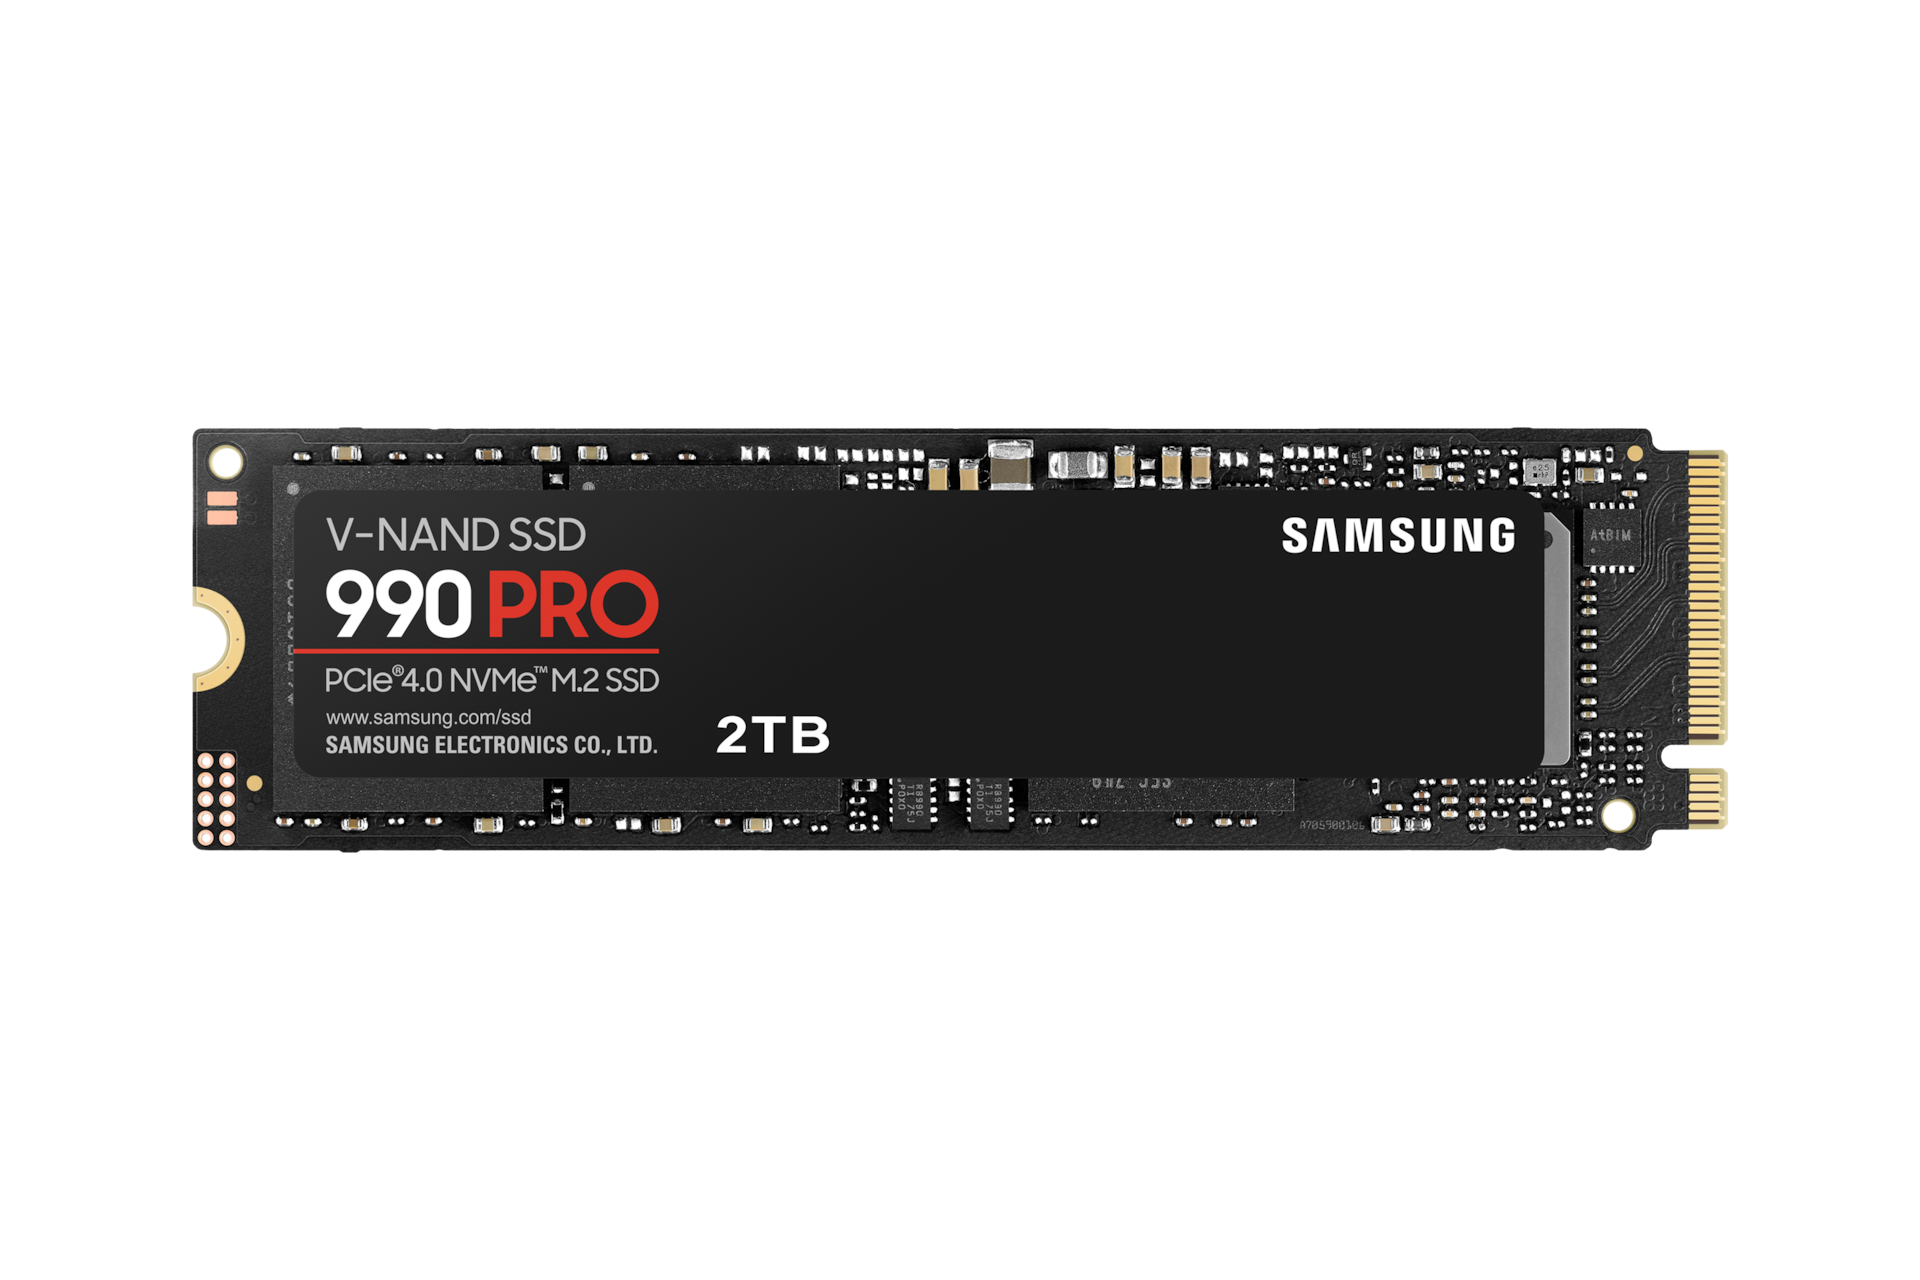 https://images.samsung.com/is/image/samsung/p6pim/ca/mz-v9p2t0b-am/gallery/ca-990pro-nvme-m2-ssd-mz-v9p2t0b-am-533750492?$650_519_PNG$